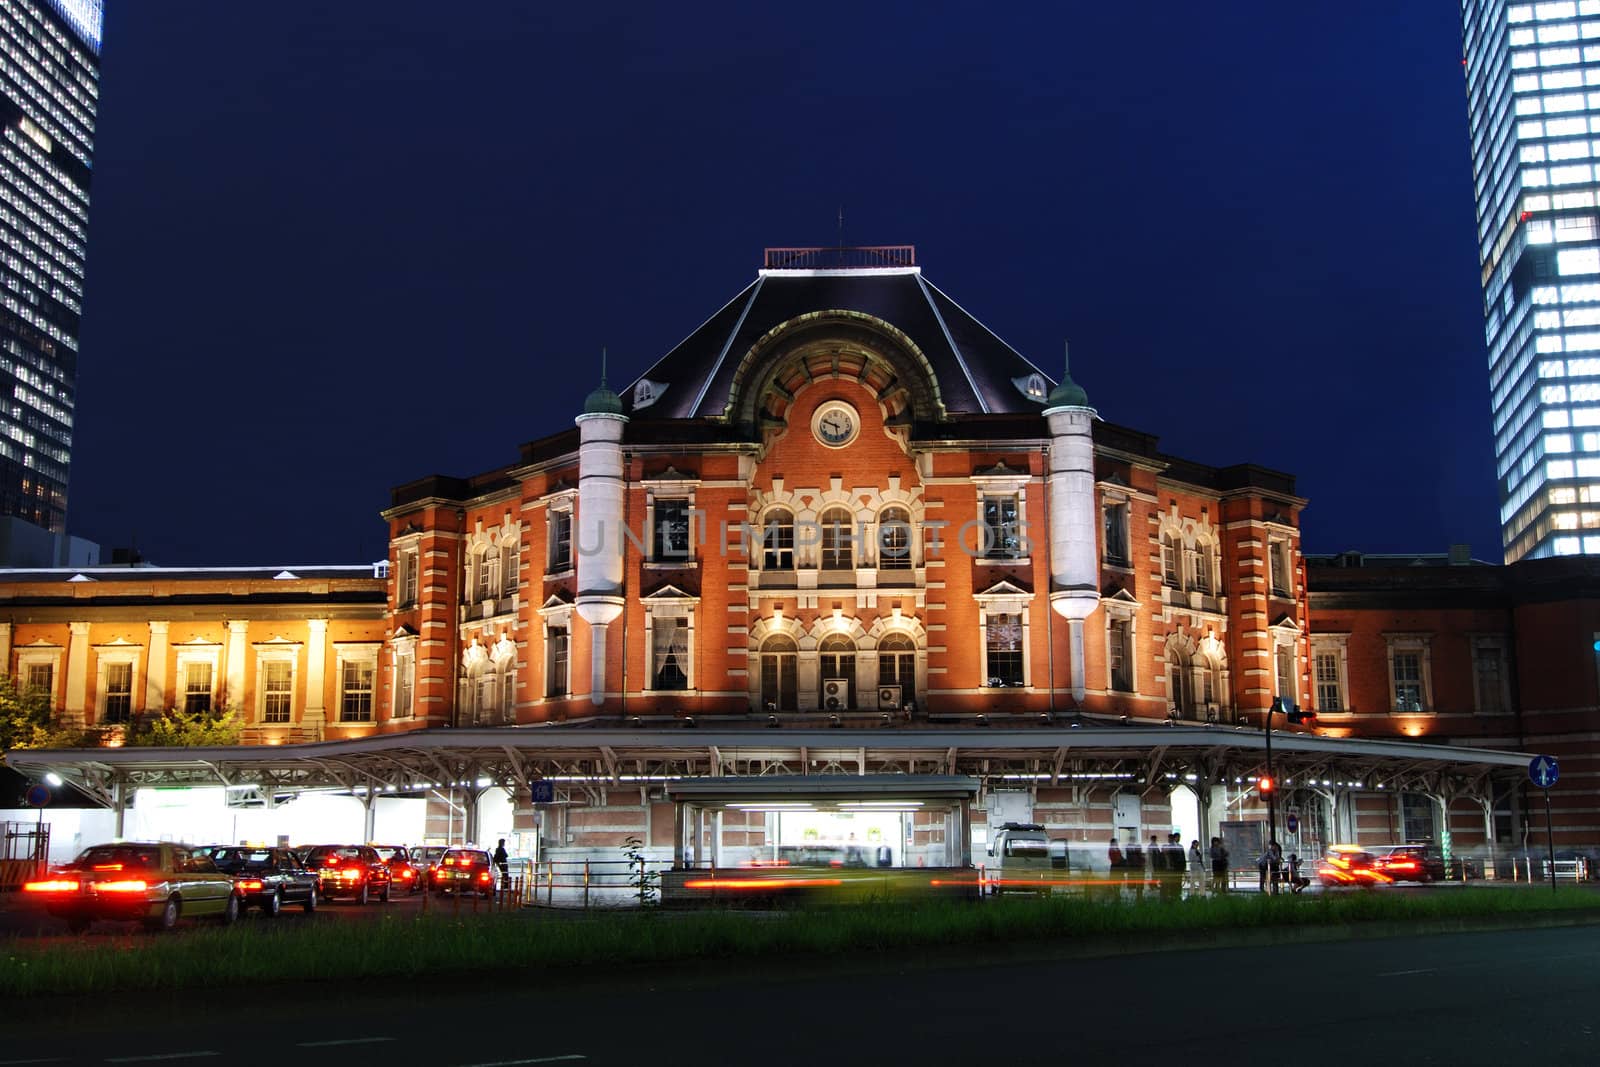 old building of Tokyo railway station built in 1914 at twilight time with many taxi-cars among huge modern buildings, Japan